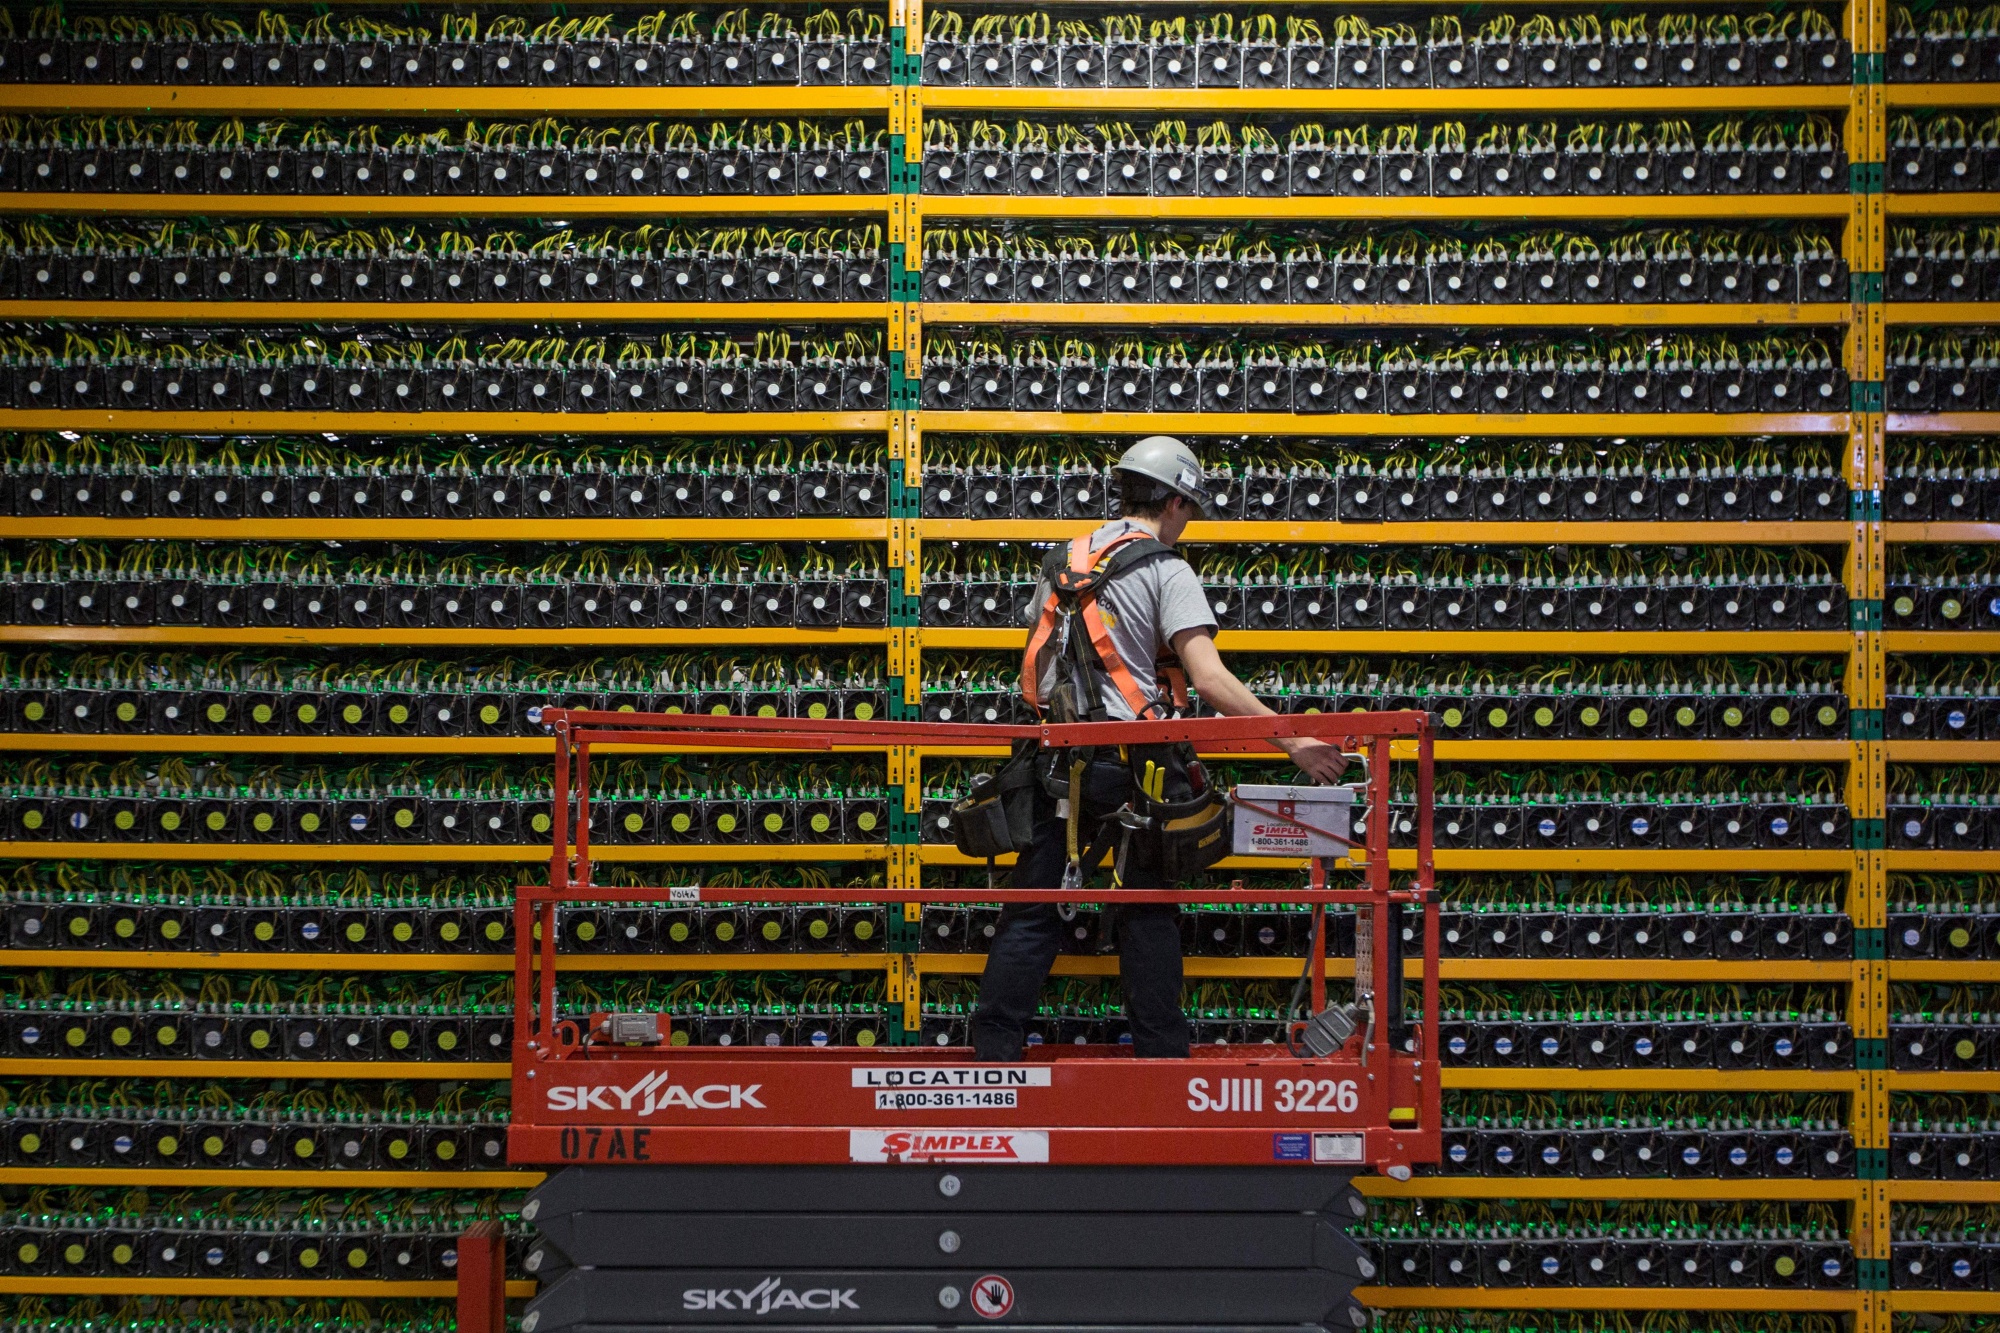 How To Mine Bitcoin With Roller Coin, by Sweaty Investing